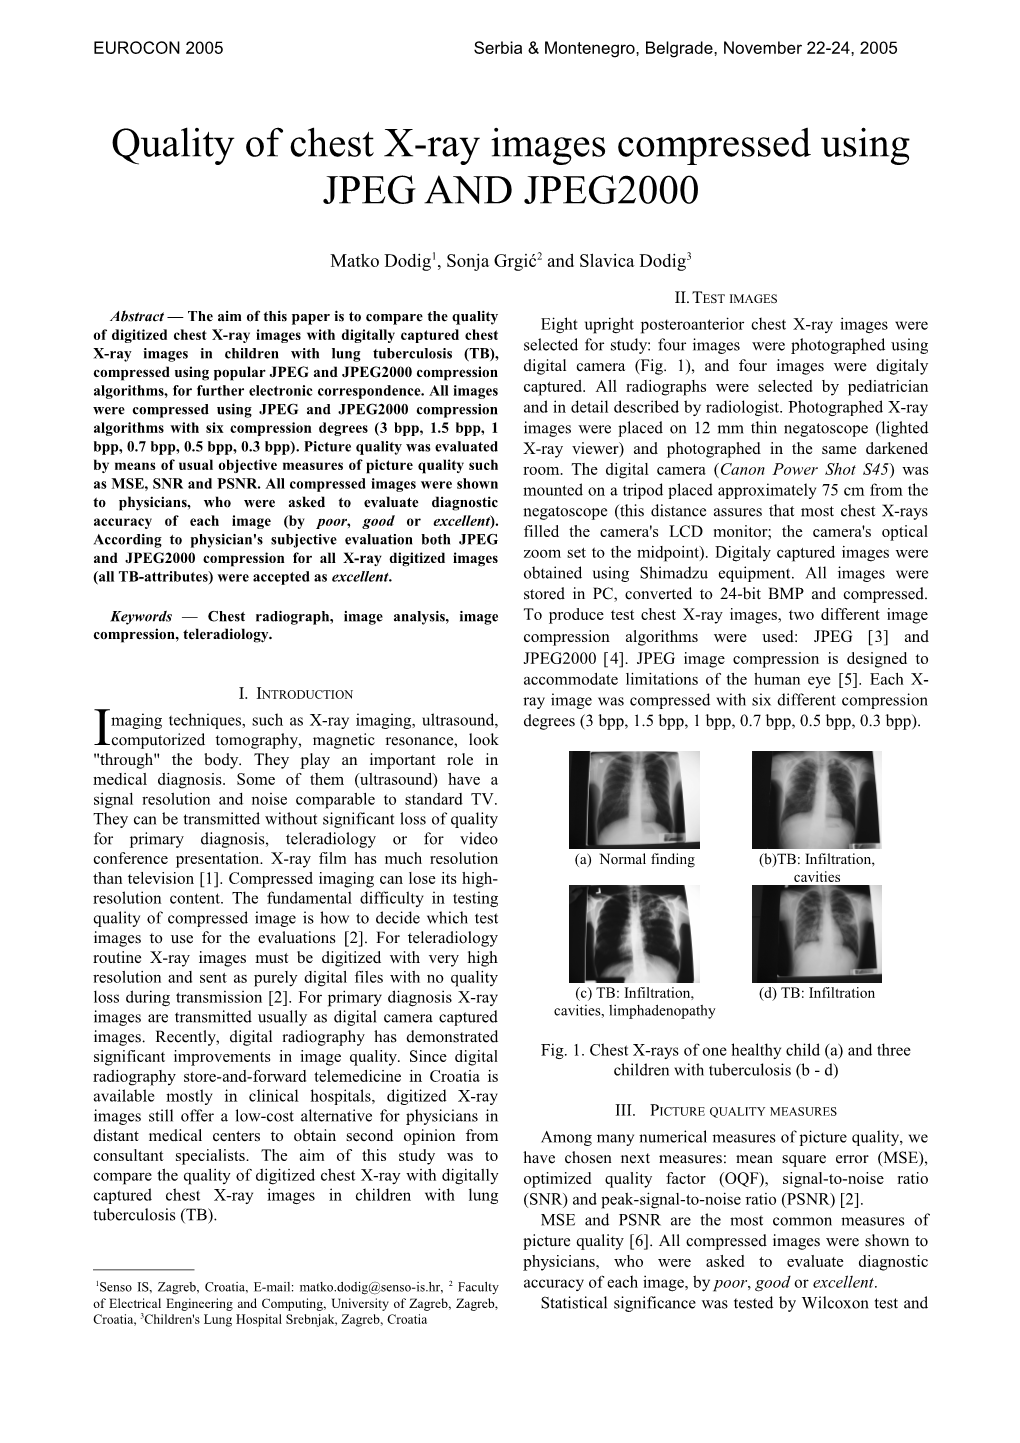 Quality of Chest X-Ray Images Compressed Using JPEG and JPEG2000